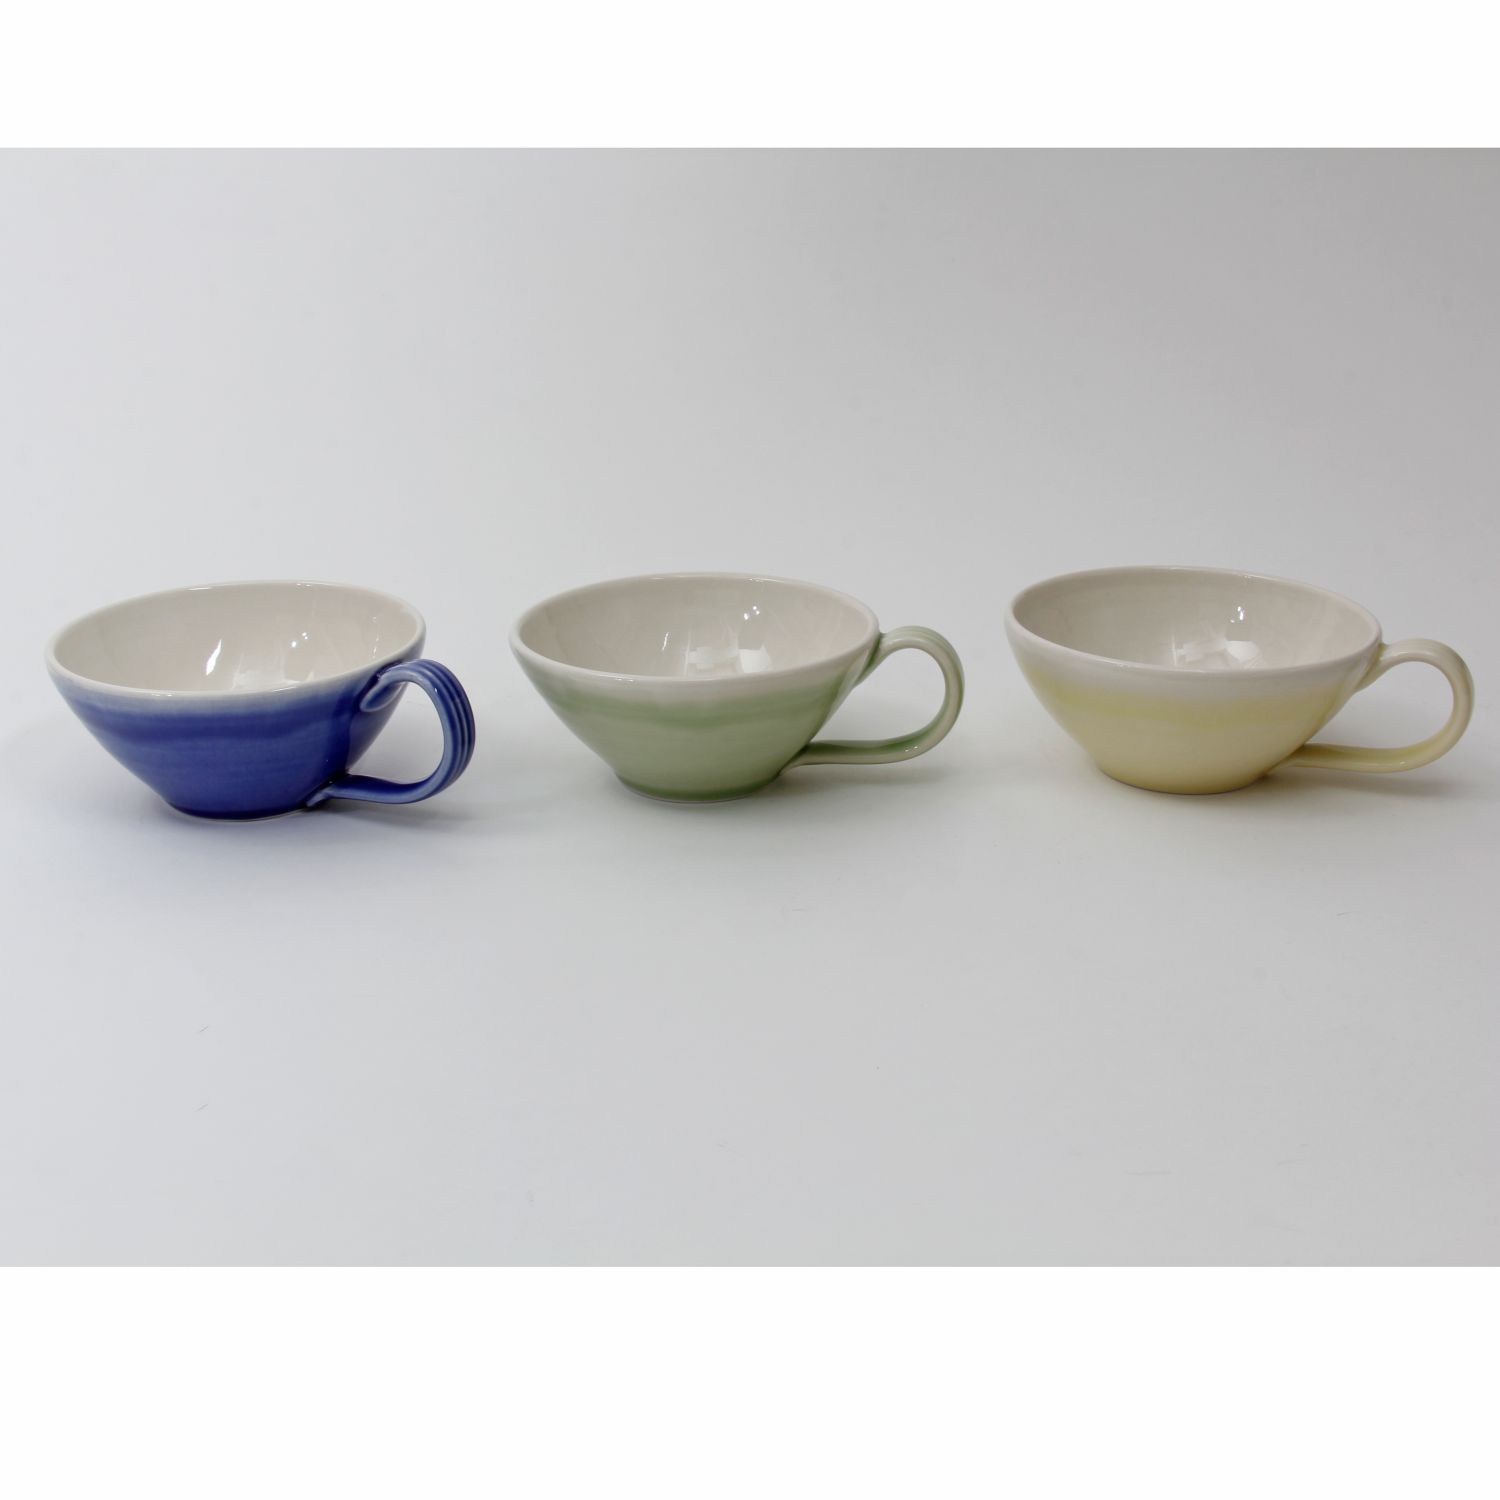 Thomas Aitken: Cafe Au Lait Cup (Each sold separately) Product Image 1 of 1